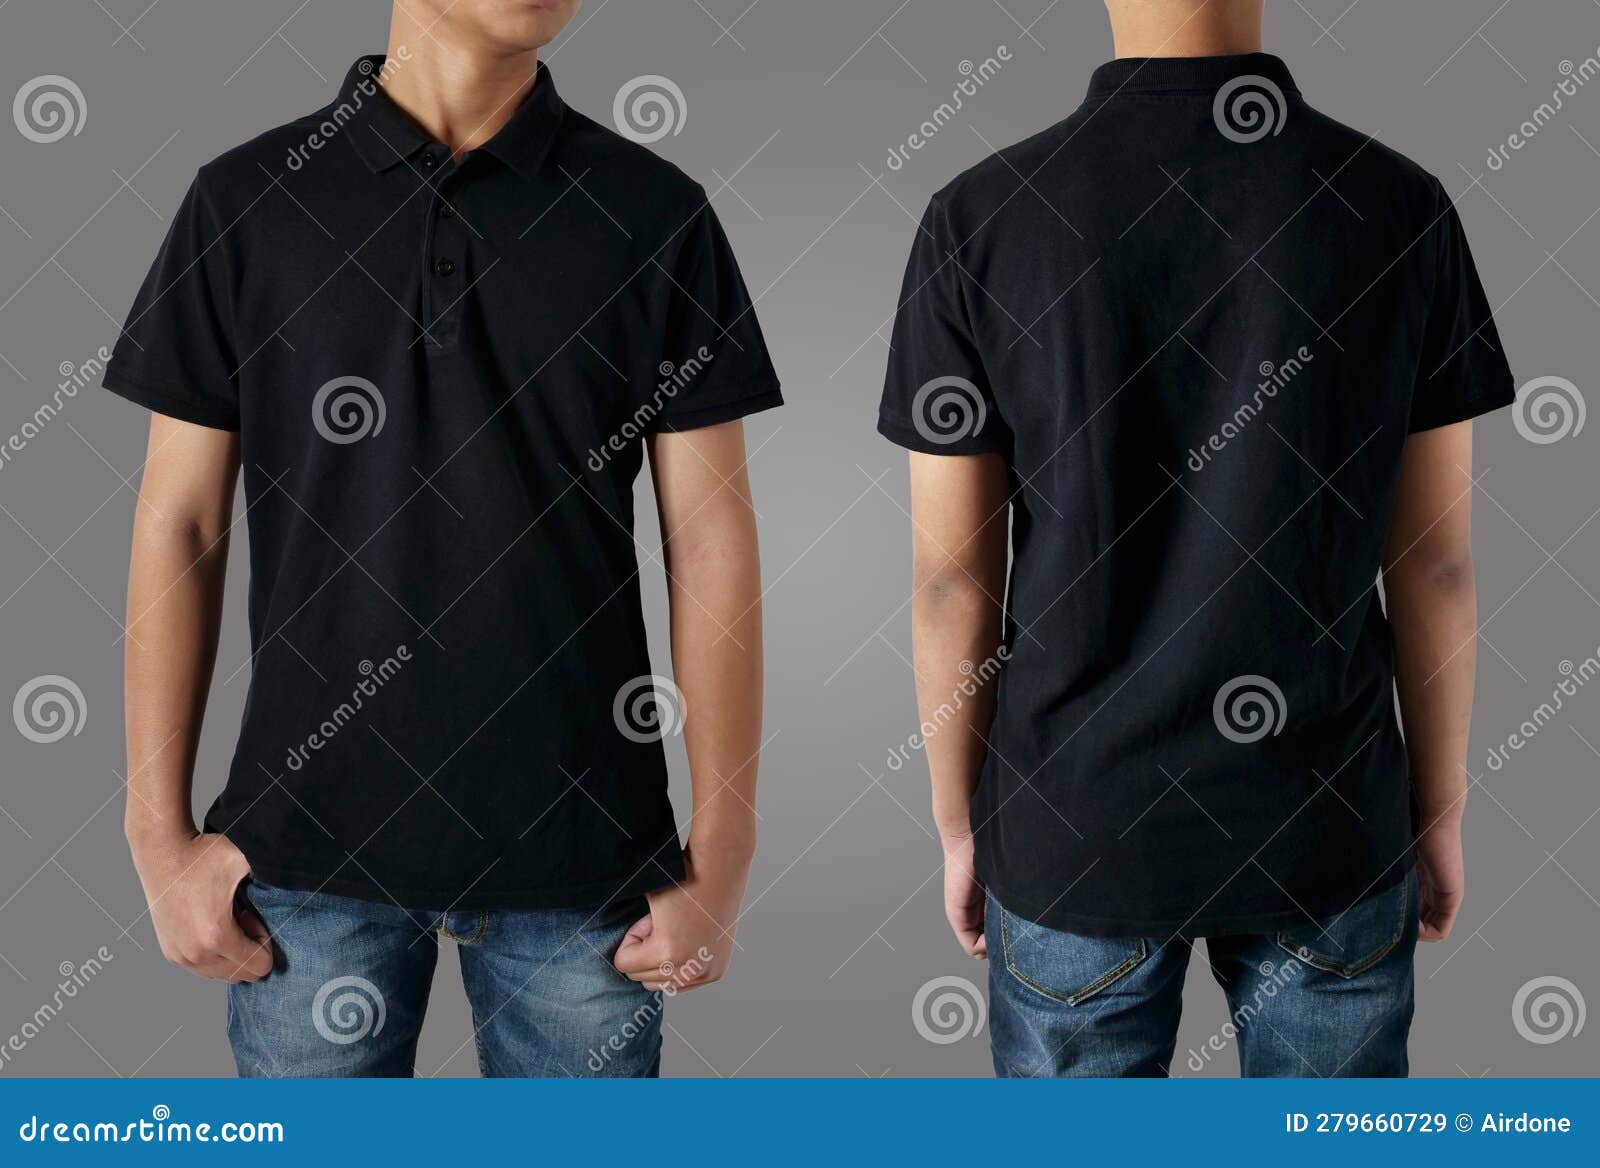 Shirt front and back in black on a gray background